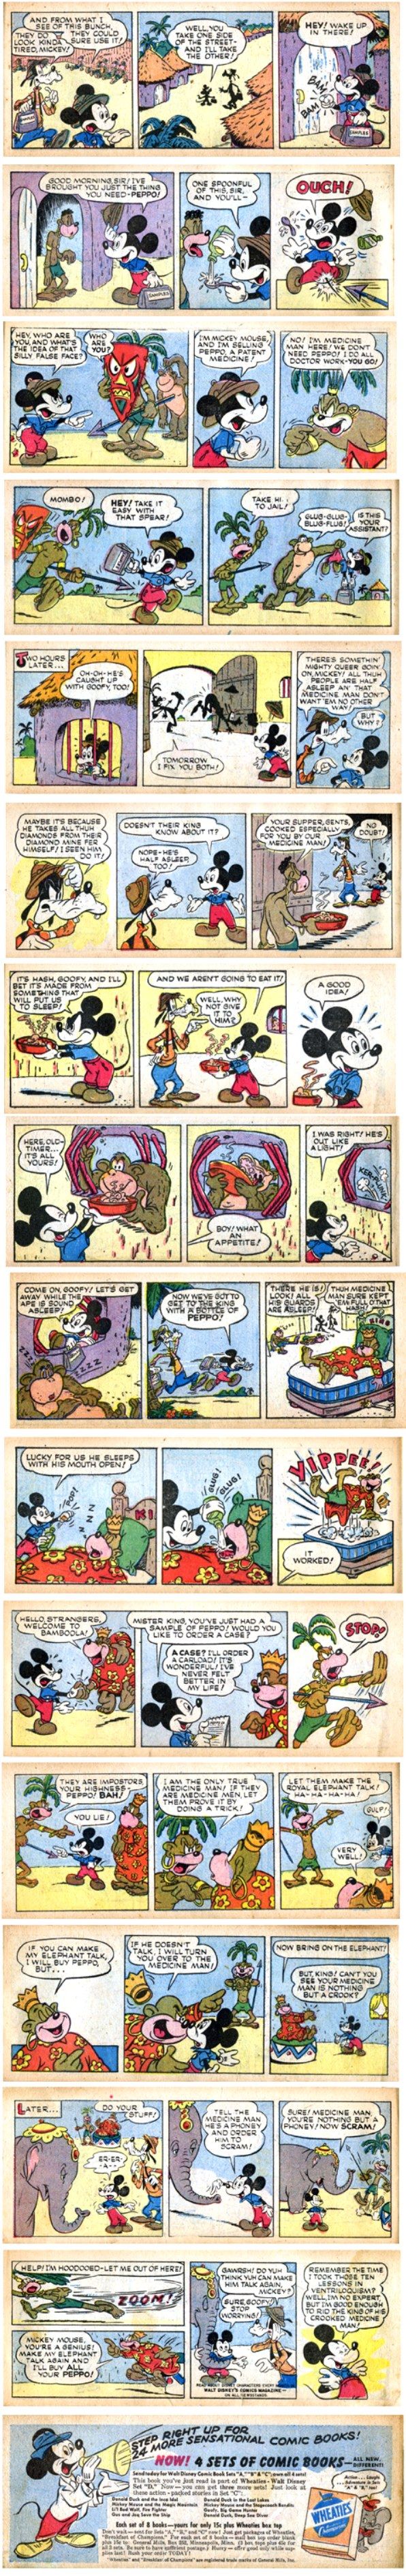 Mickey Mouse Speed Dealer Comic